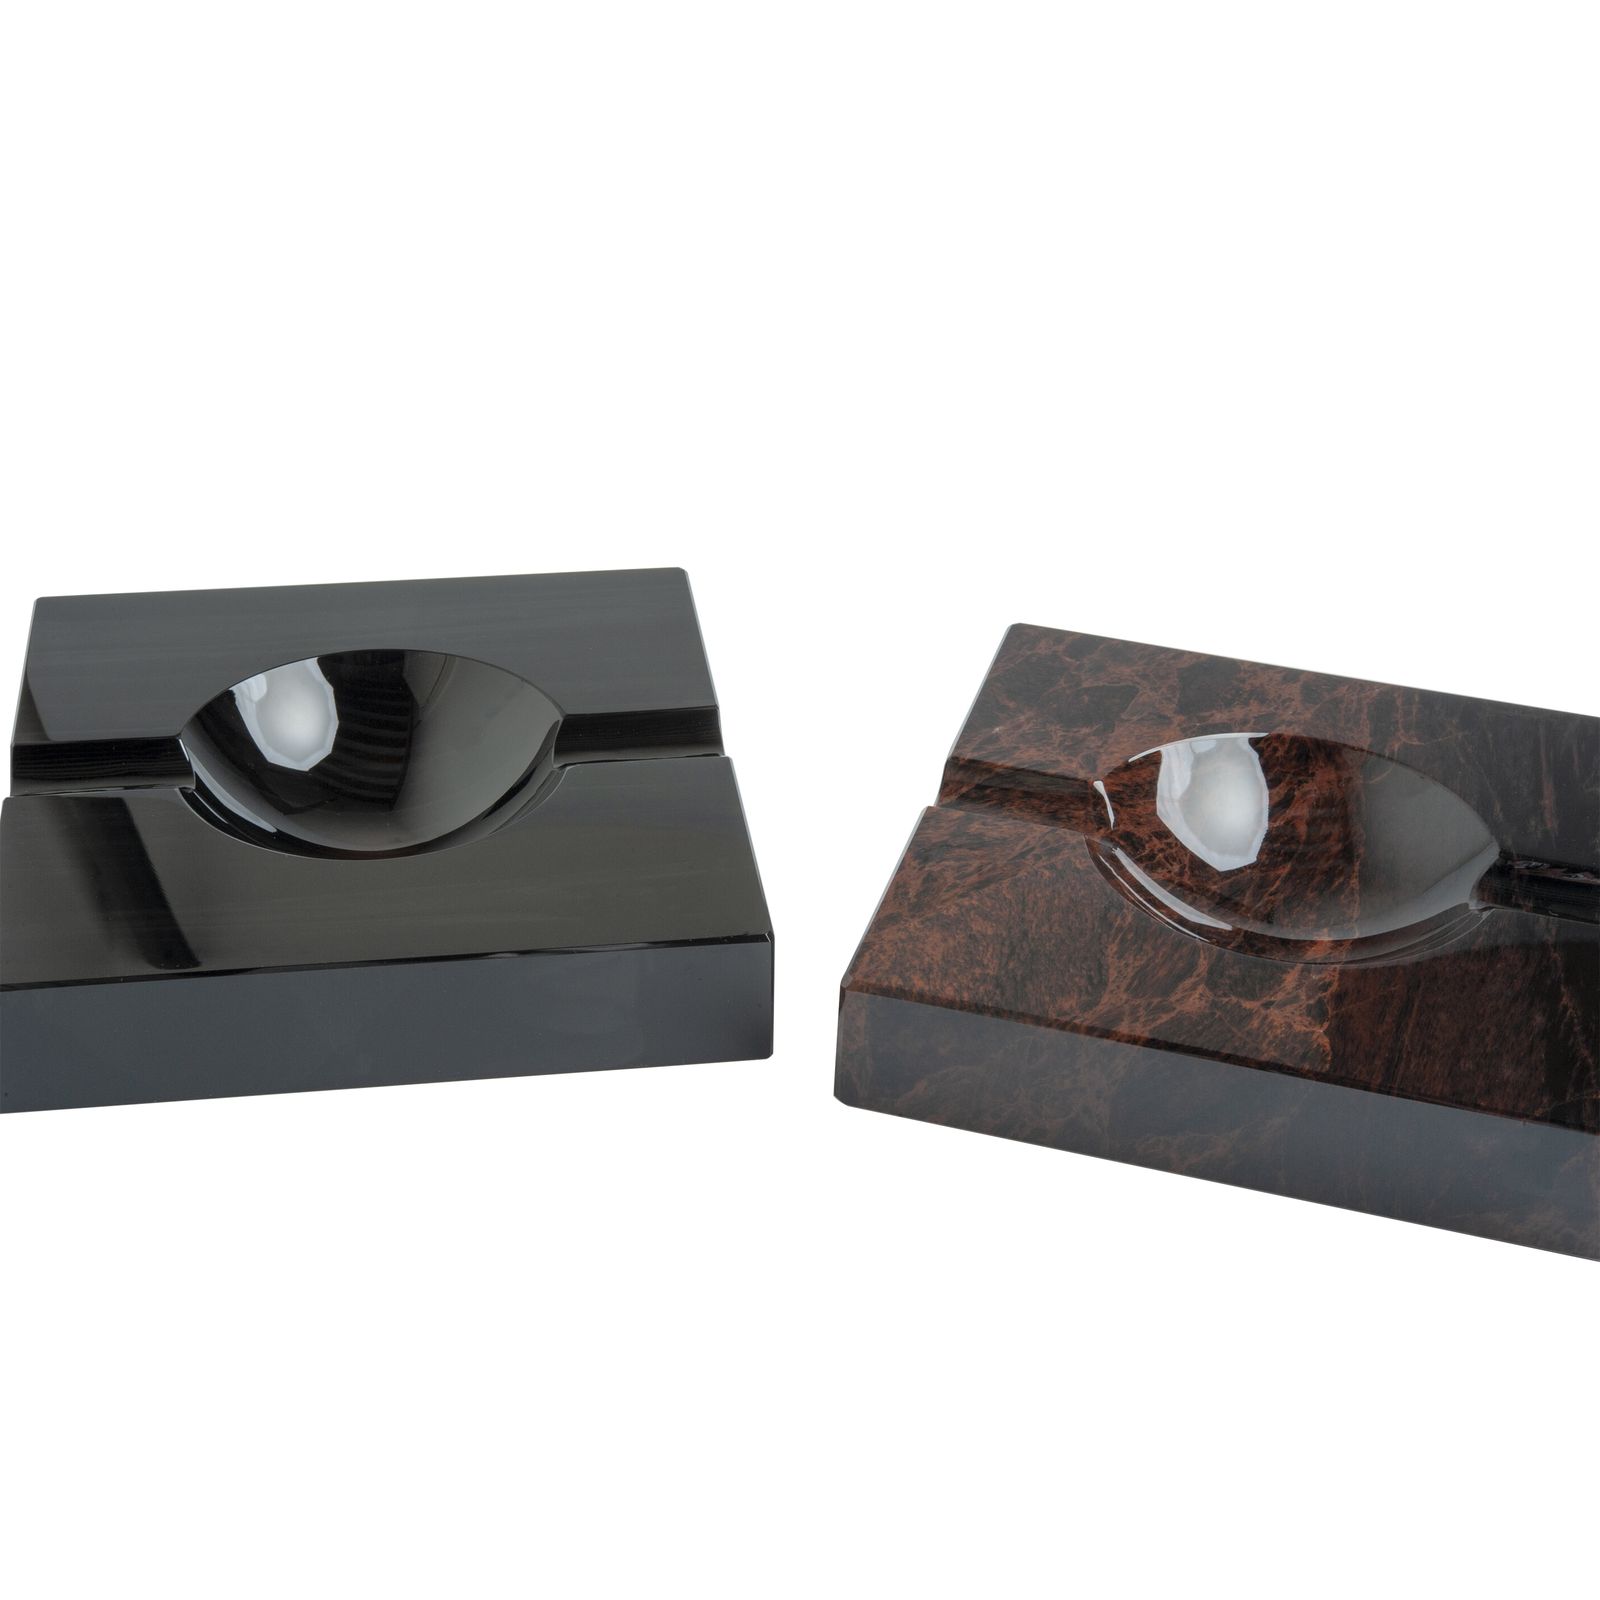 Cendrier pour 2 cigares / Ashtray for 2 cigars